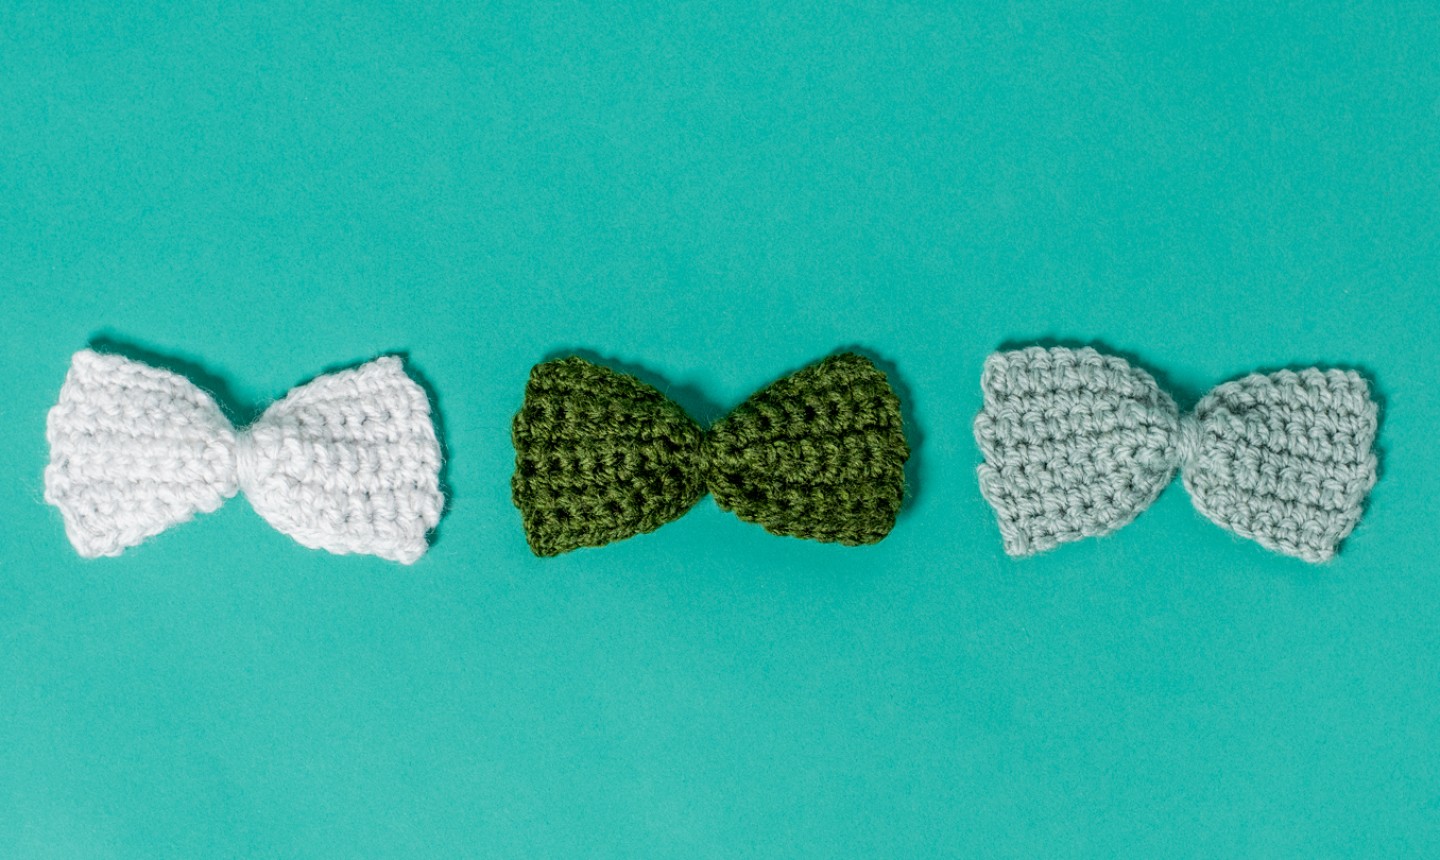 crochet bows on teal background